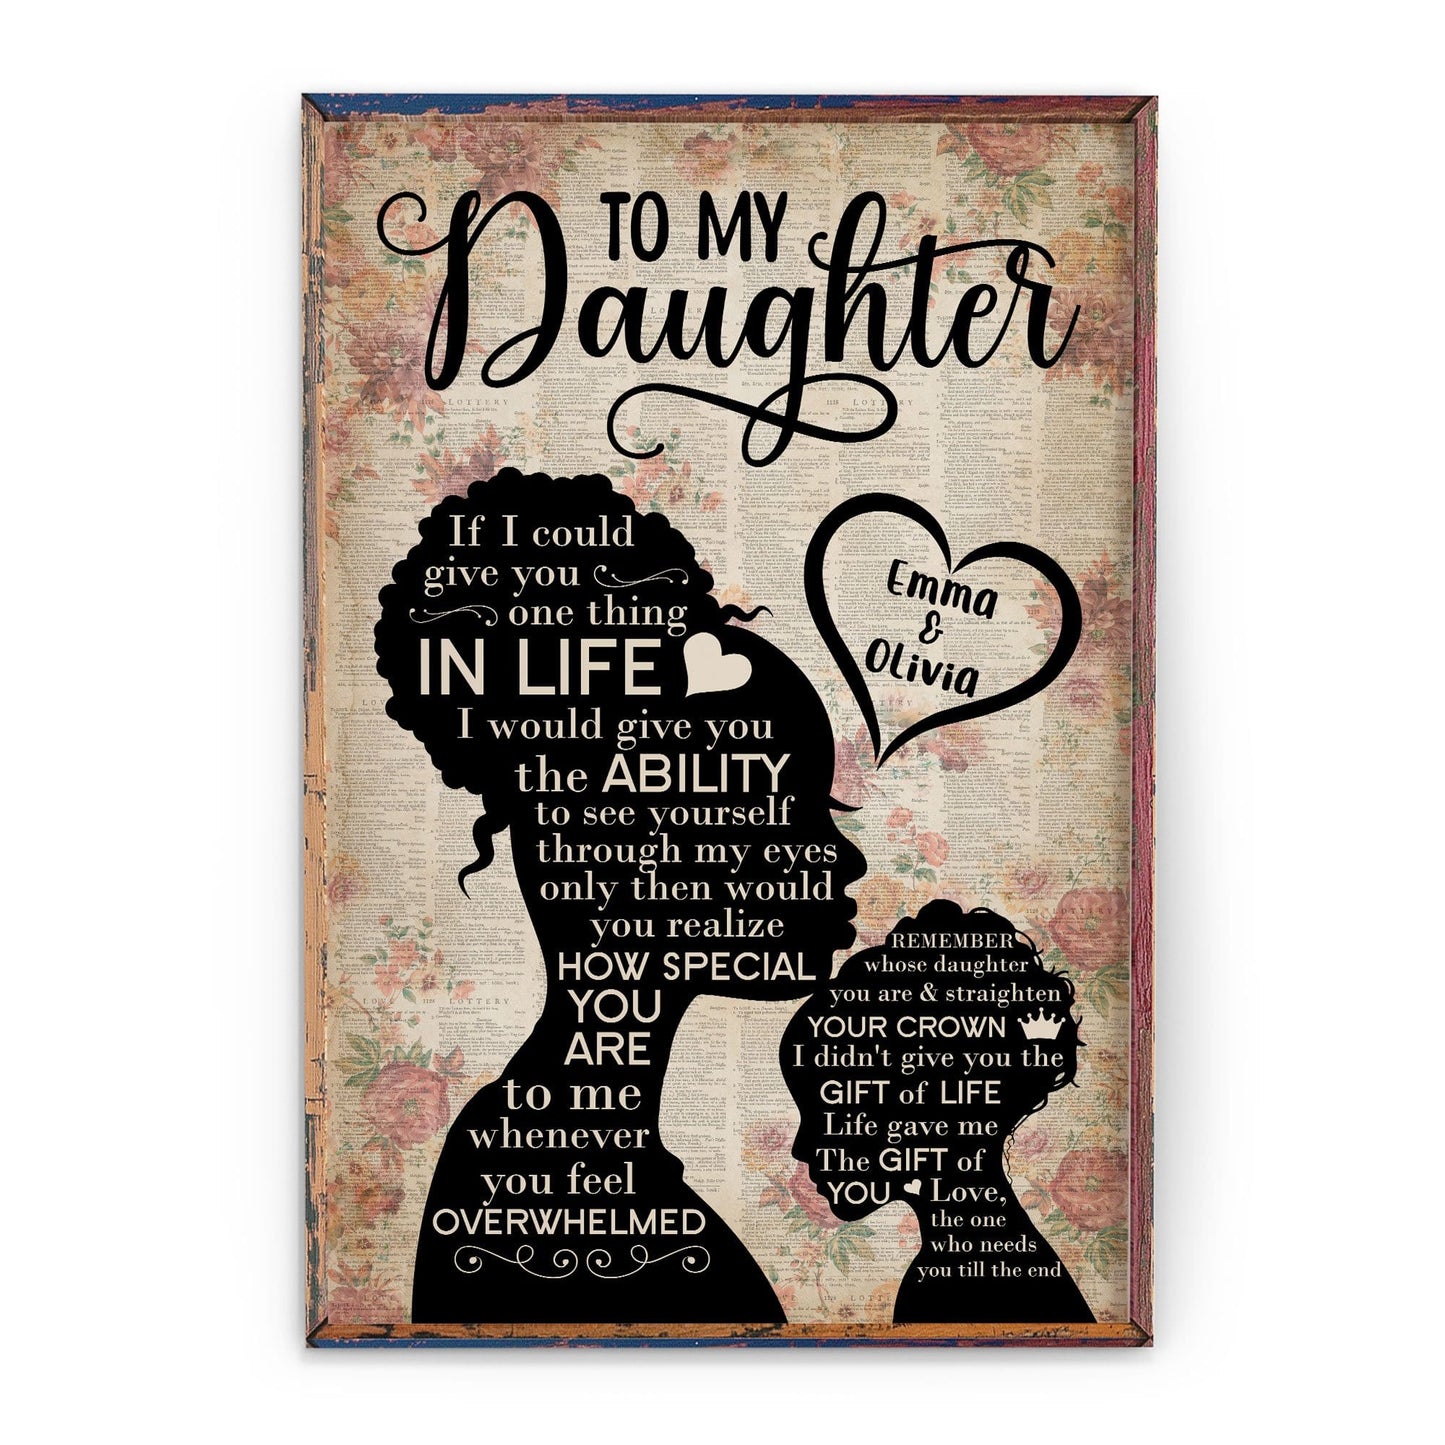 To My Daughter Remember Whose Daughter You Are And Straighten Your Crown, Family Custom Poster, Gift For Daughter-Macorner